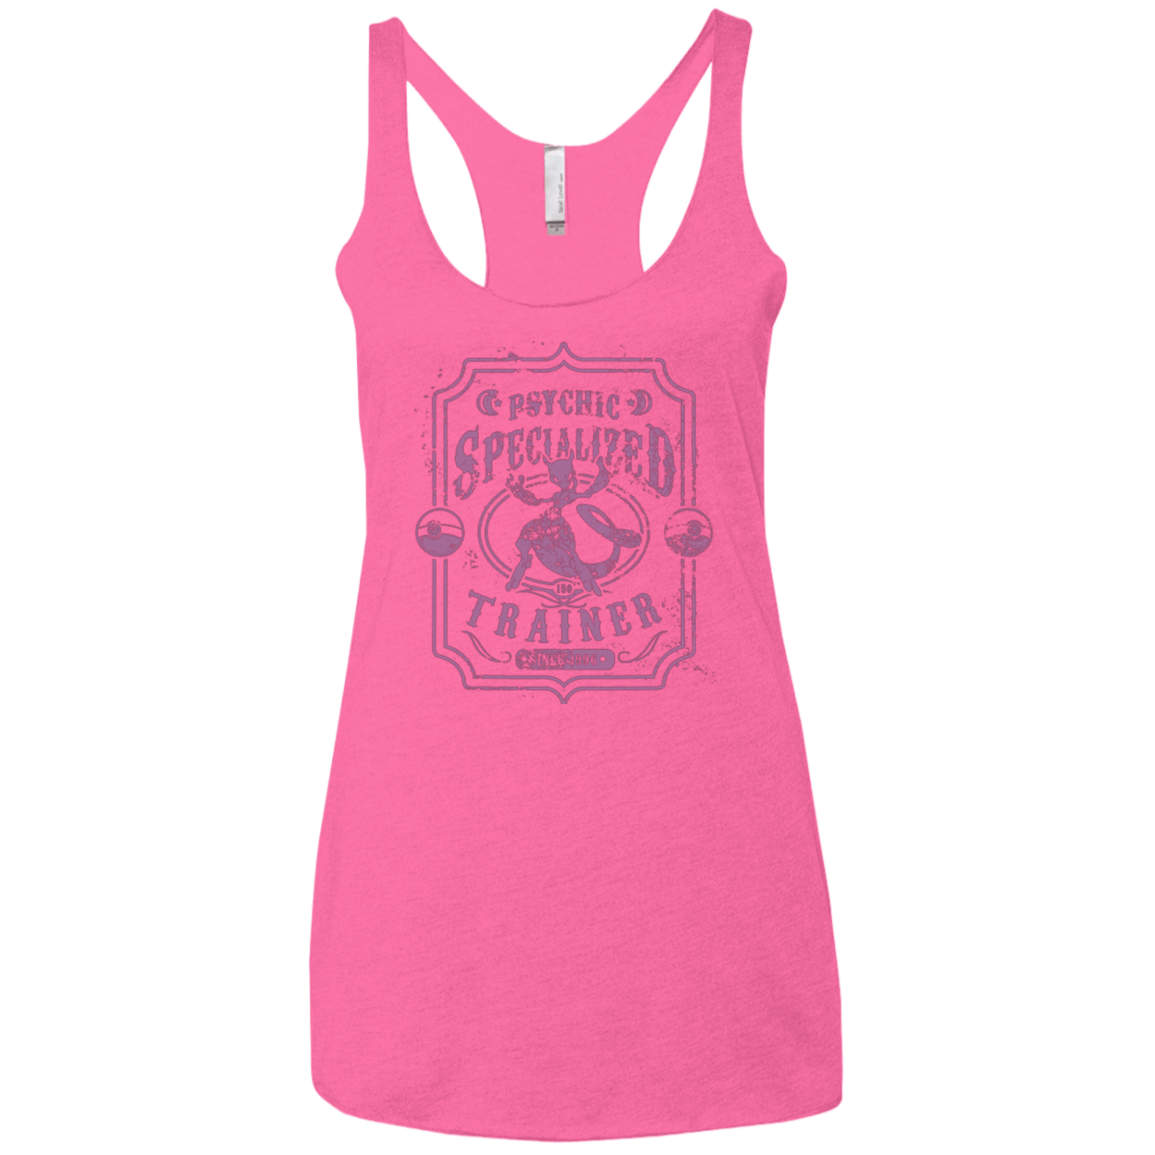 T-Shirts Vintage Pink / X-Small Psychic Specialized Trainer 2 Women's Triblend Racerback Tank